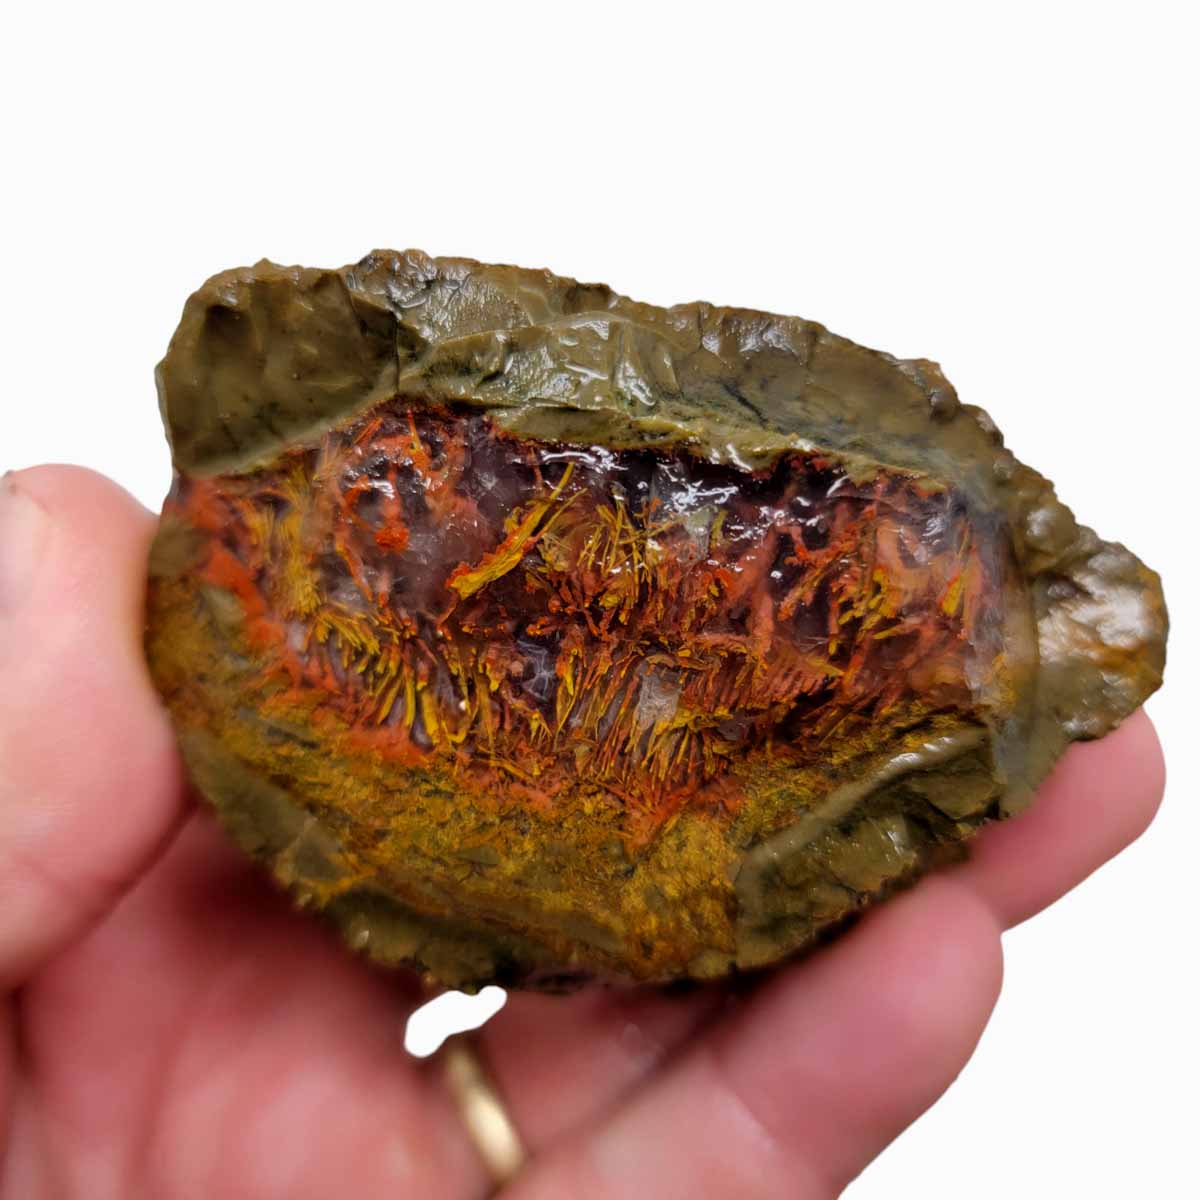 Priday Moss Bed Egg Rough Chunk!